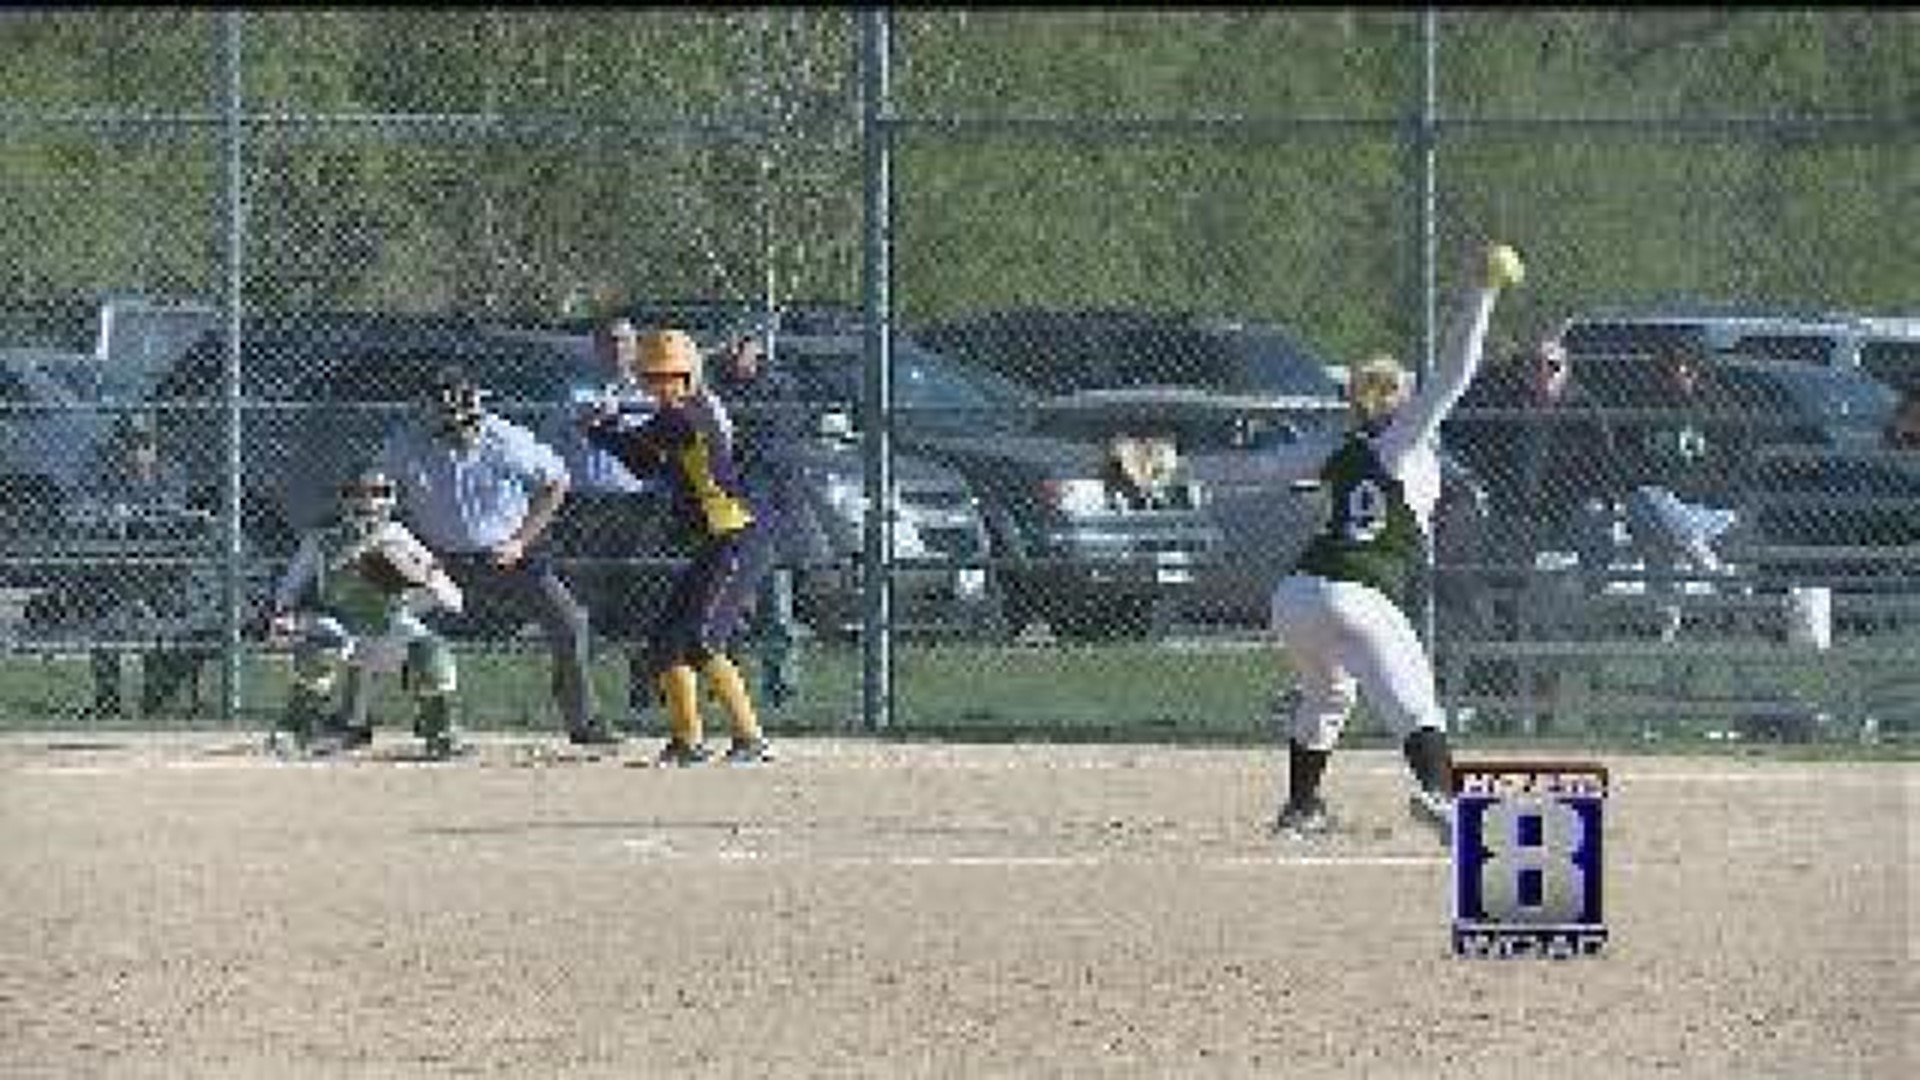 Sterling Plays Alleman In Softball